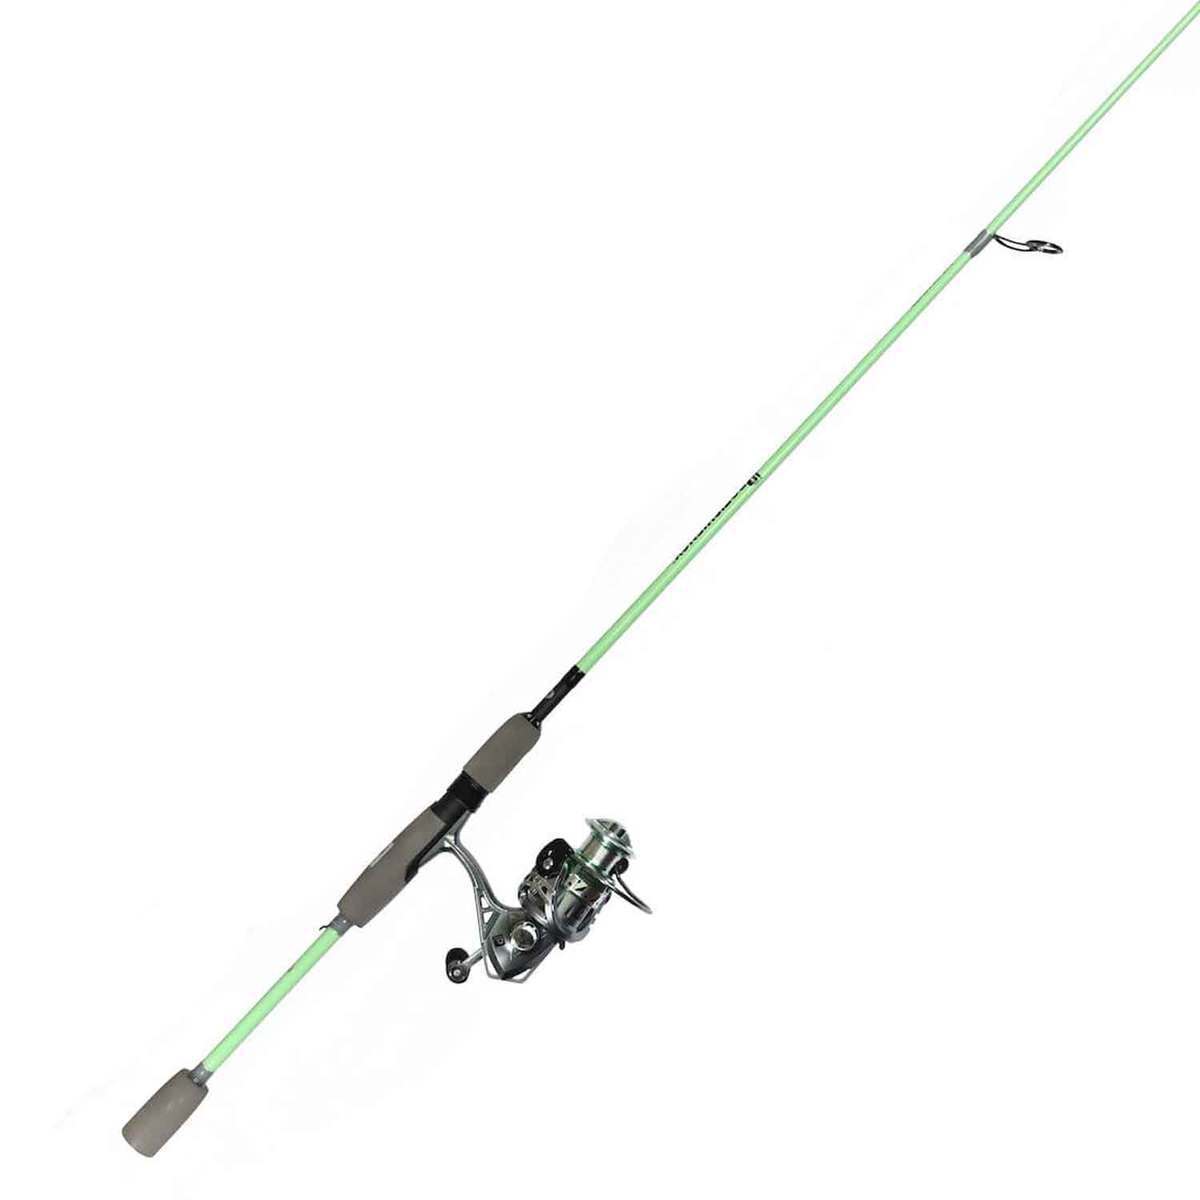 Profishiency Mint Spinning Rod and Reel Combo - 6ft 6in, Medium